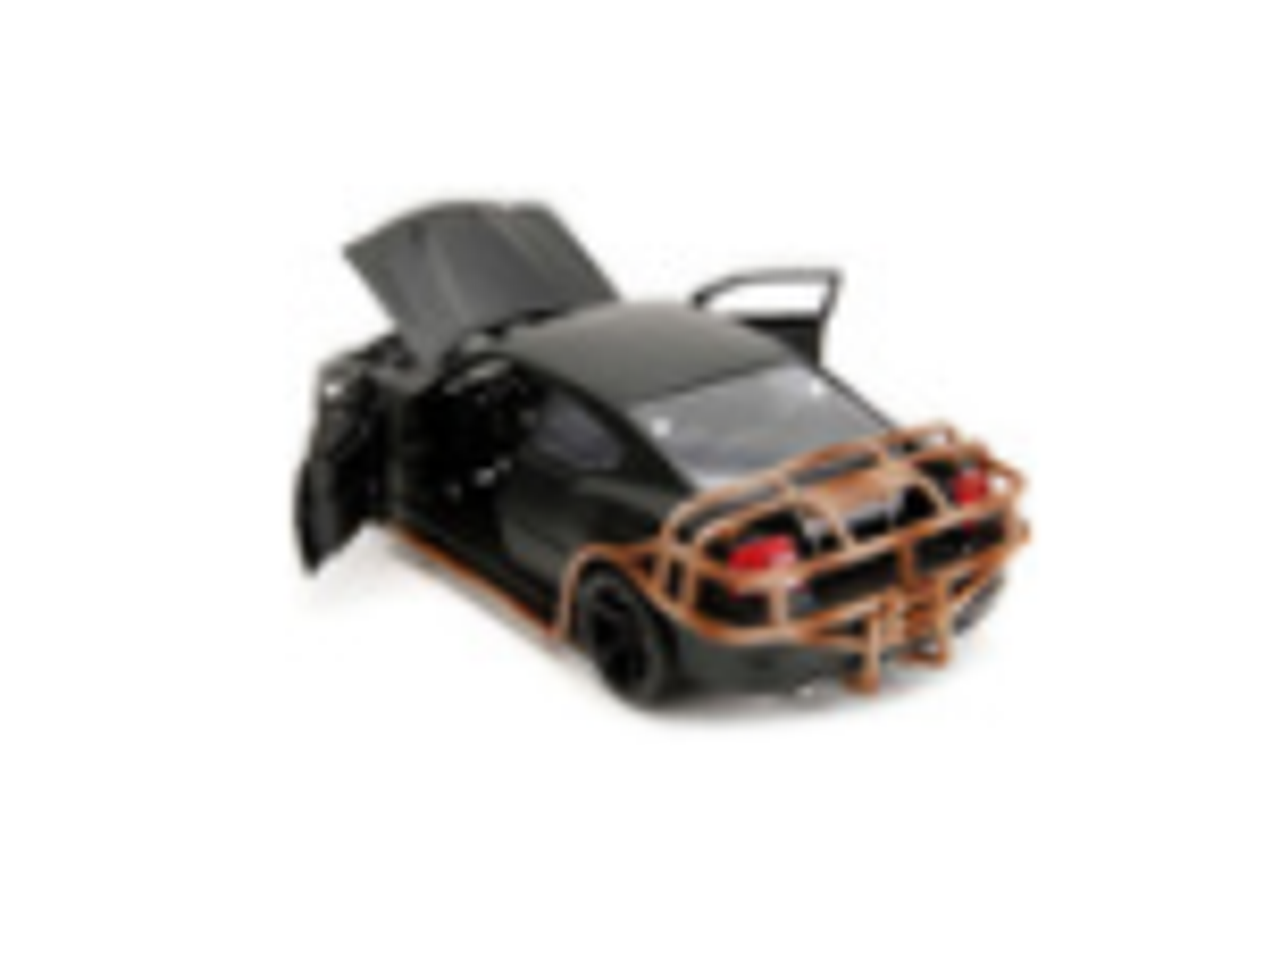 2006 Dodge Charger Matt Black with Outer Cage "Fast & Furious" Movie 1/24 Diecast Model Car by Jada